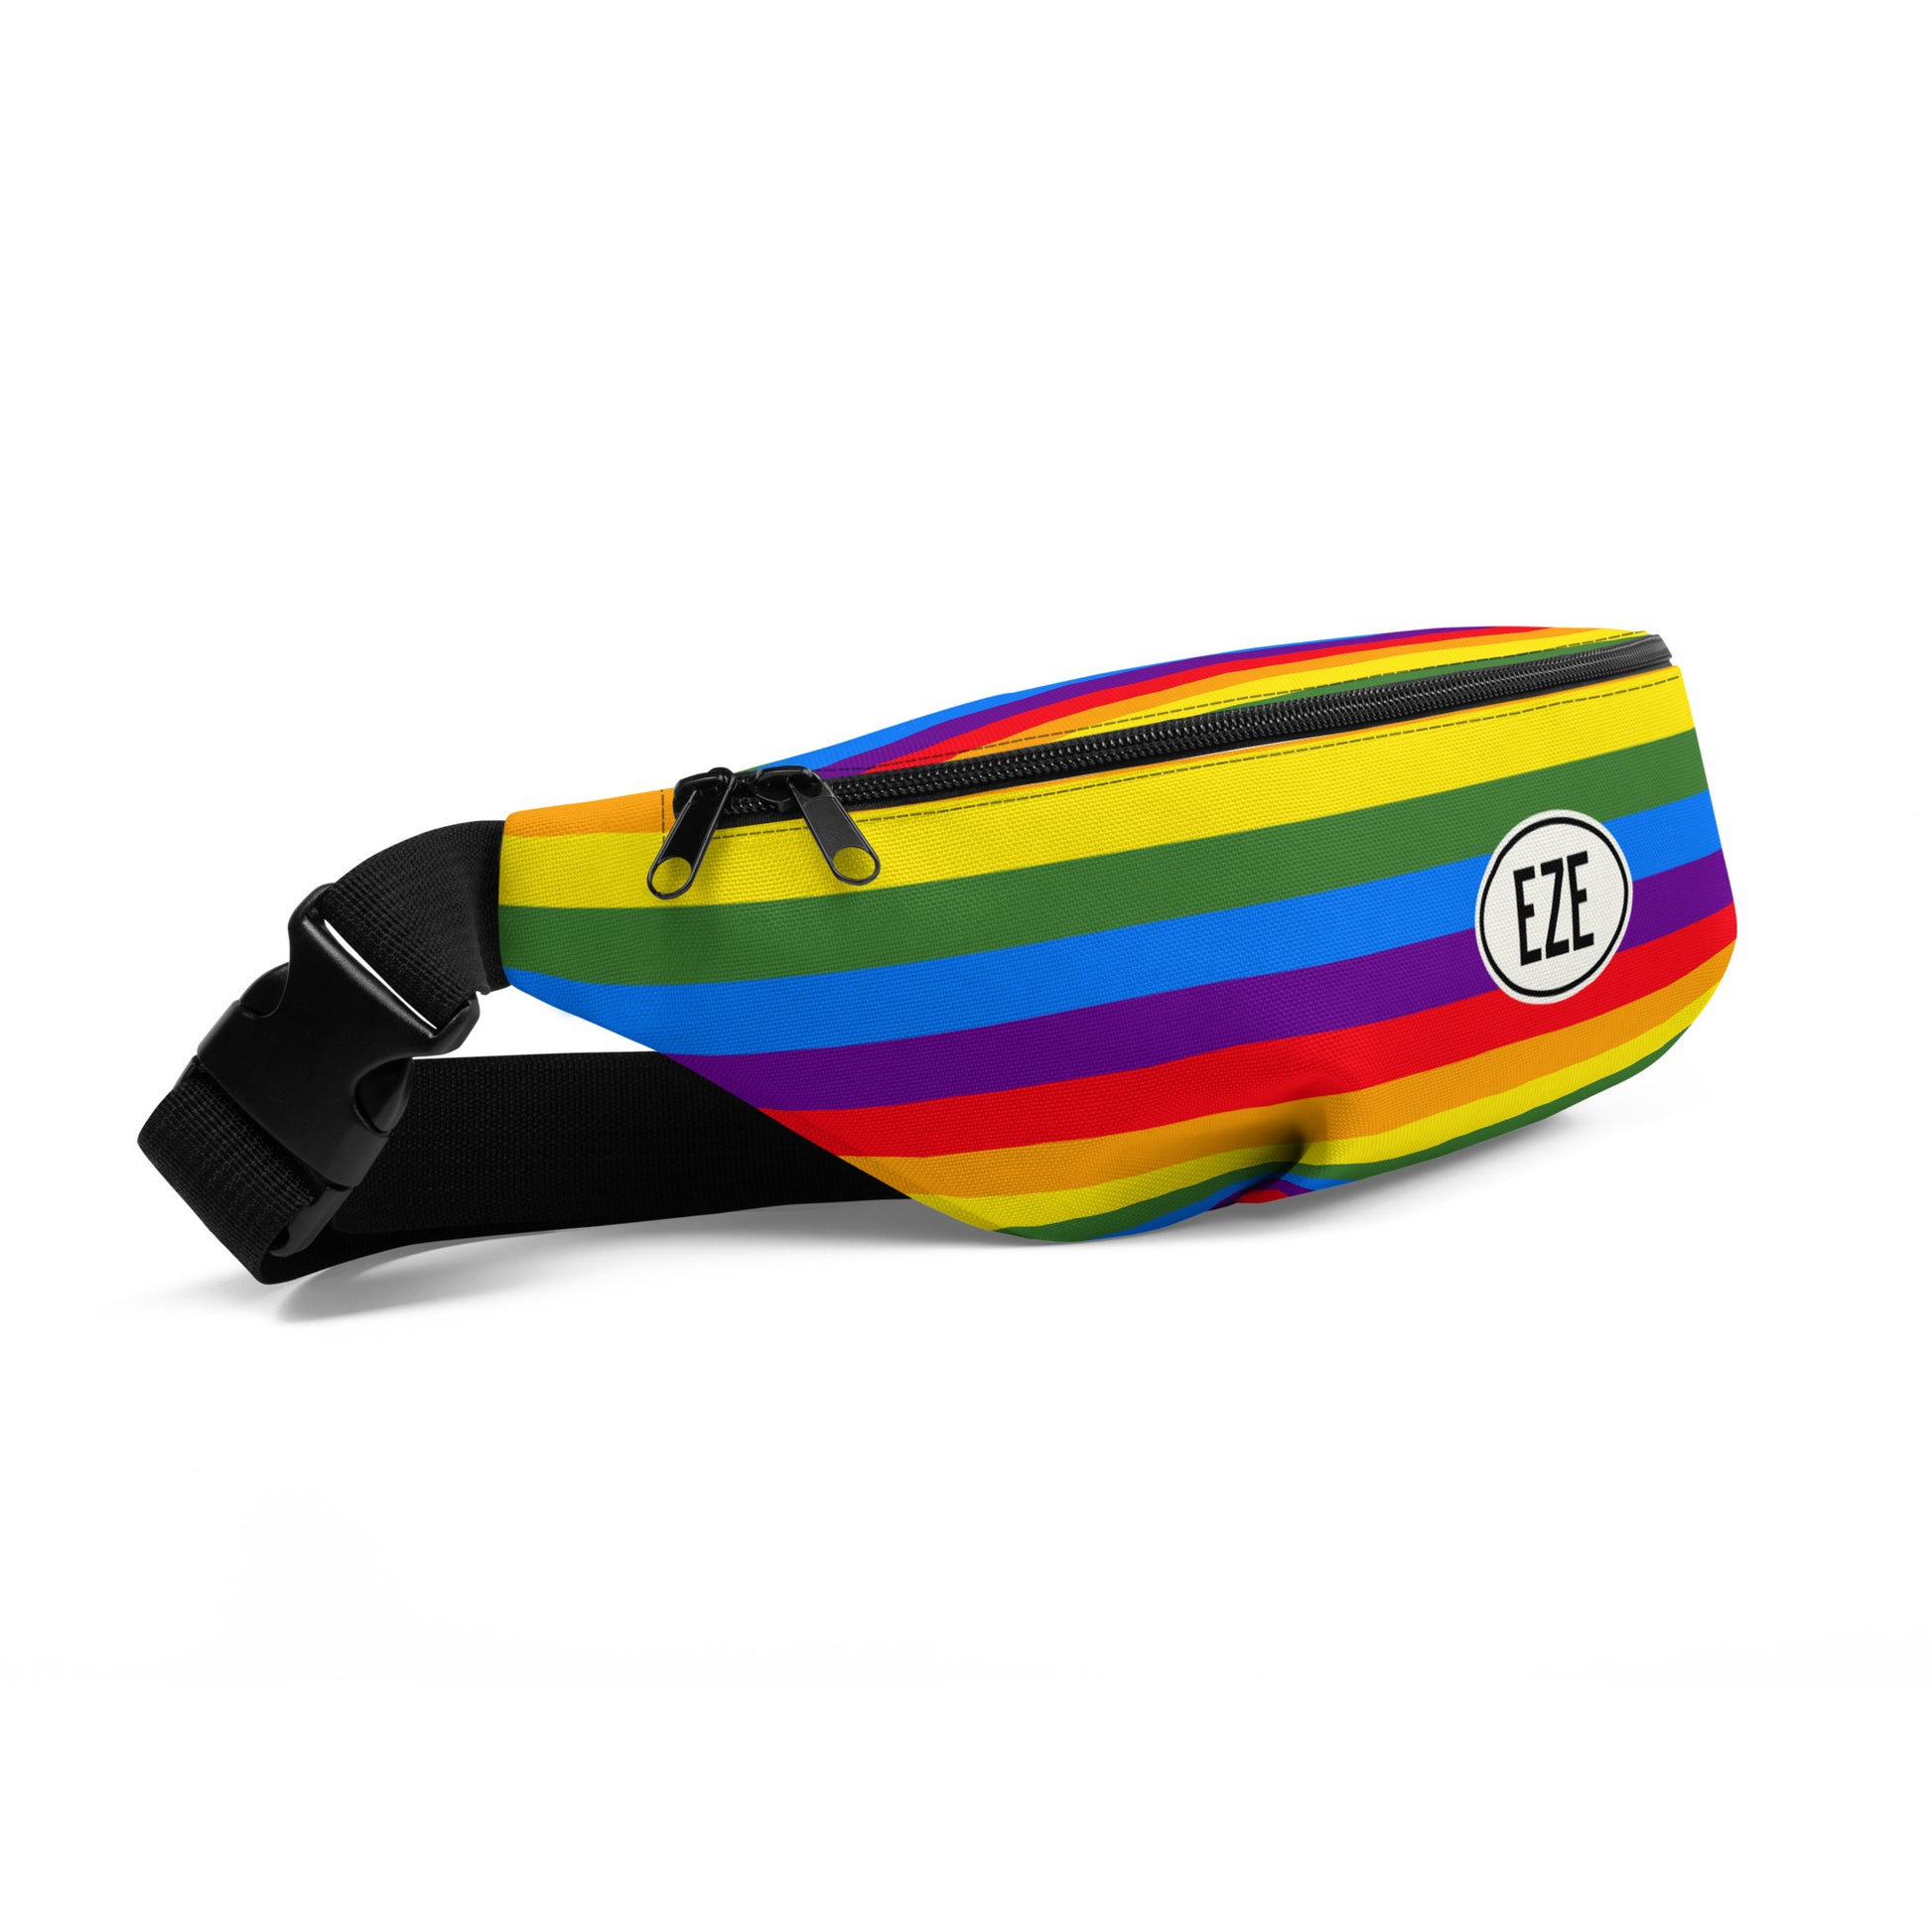 Travel Gift Fanny Pack - Rainbow Colours • EZE Buenos Aires • YHM Designs - Image 07